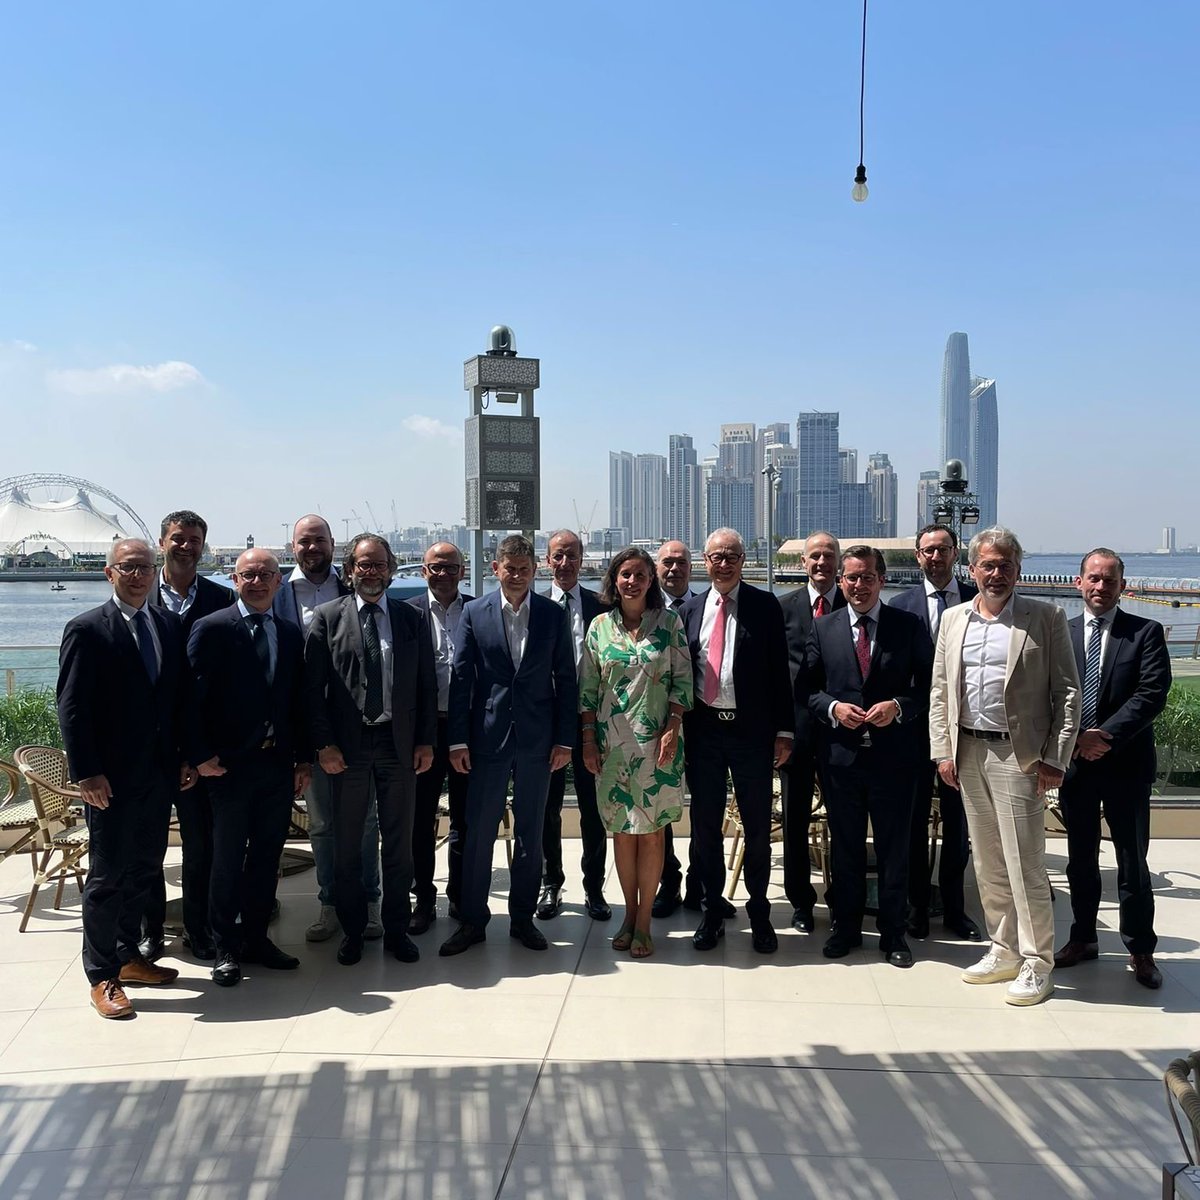 The delegation arrived in #Dubai on 24 April and had the privilege of meeting with HE Consul General Sybille Pfaff @GermConDubai for a breakfast briefing with an amazing view on the city's skyline. #UAE #BusinessDelegation #EconomicDiplomacy